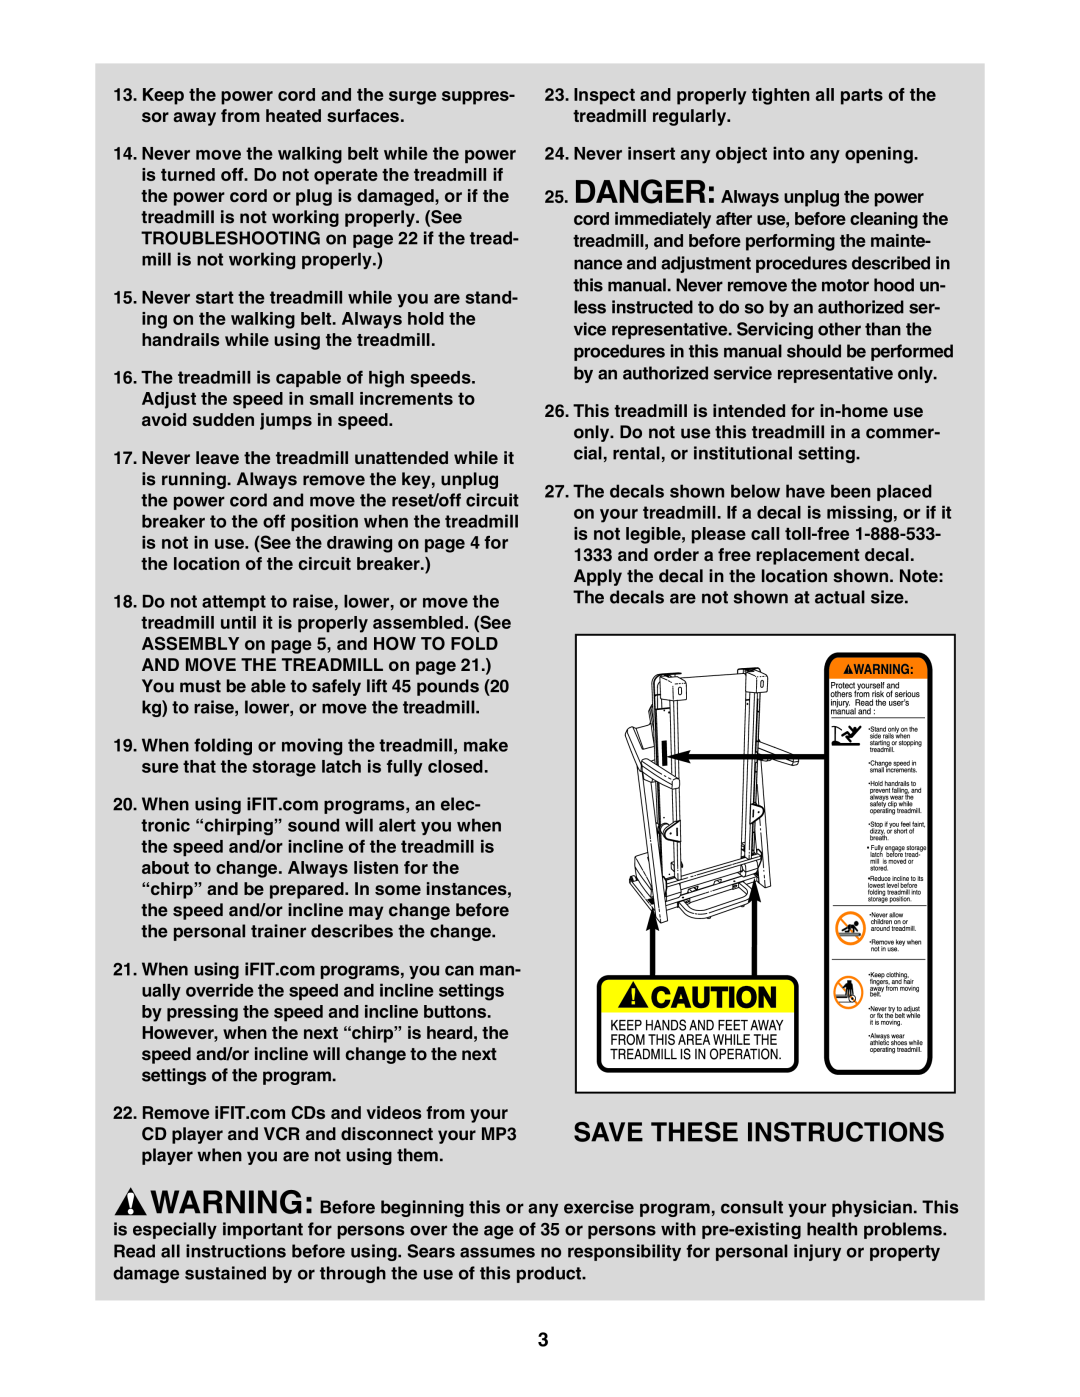 ProForm 831.29675.0 user manual Inspect and properly tighten all parts of the treadmill regularly, Save These Instructions 